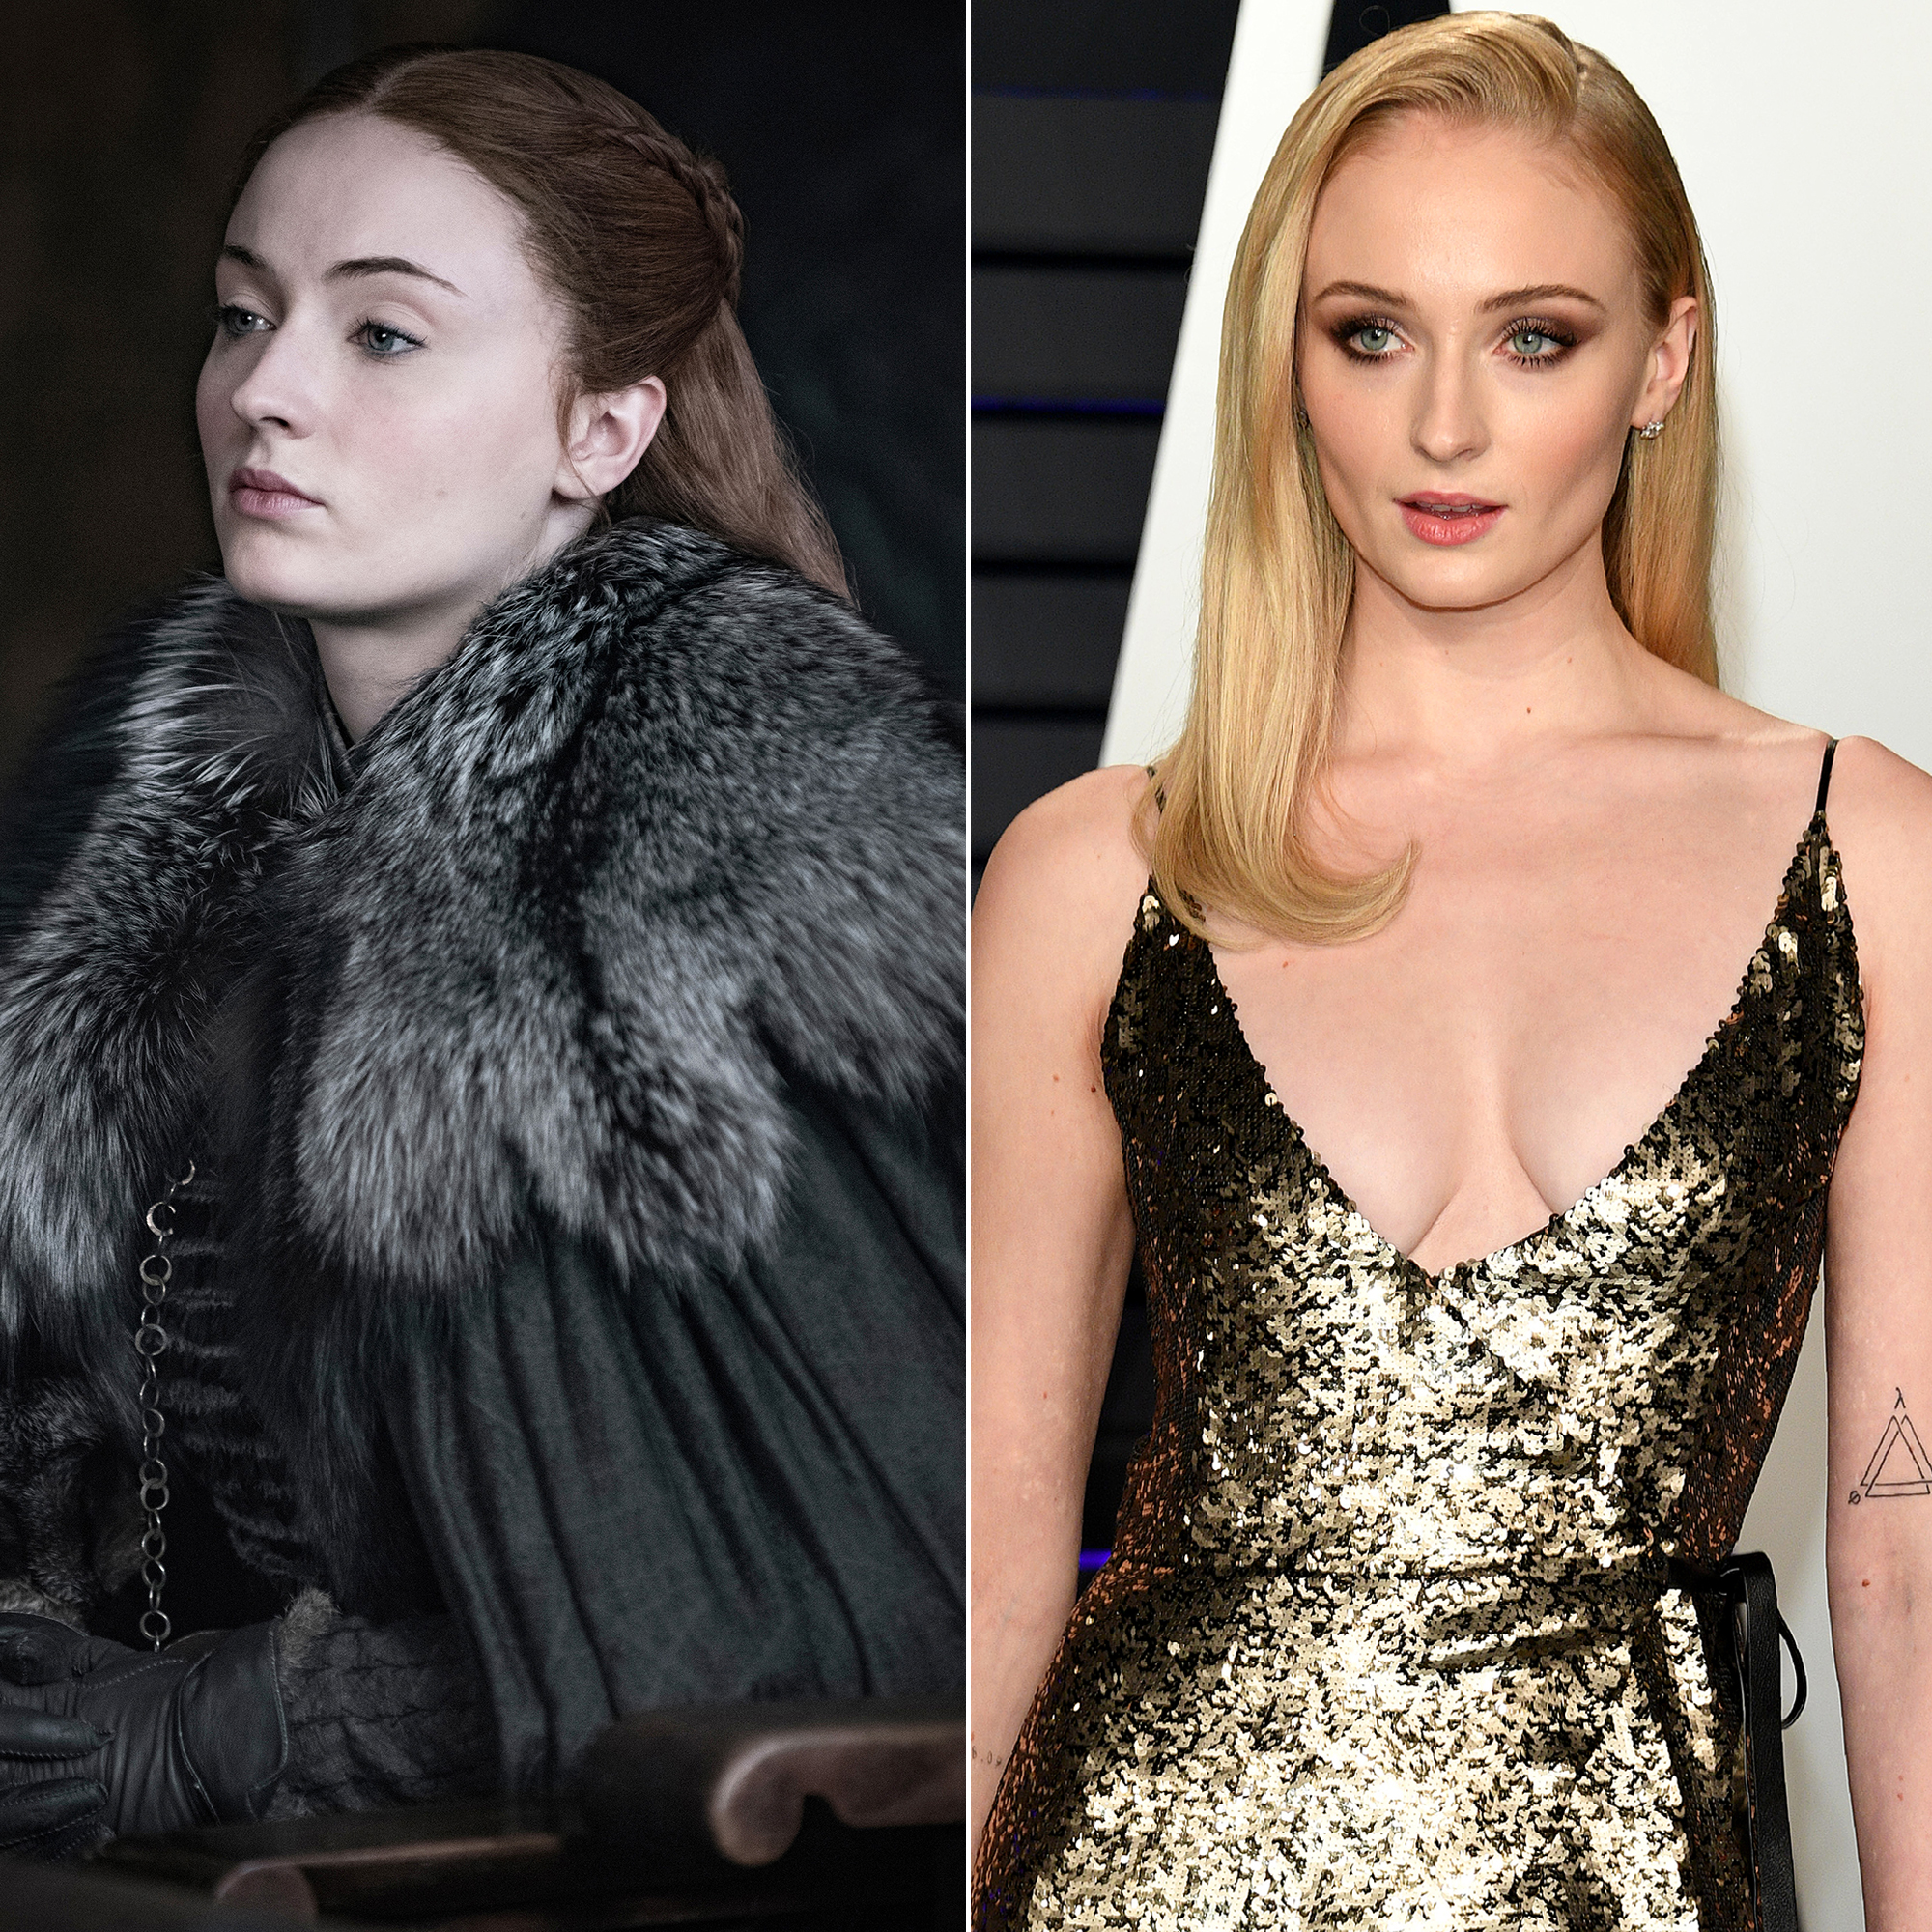 Game of Thrones' Actors Next Movies and TV Shows: Where Are They Now?